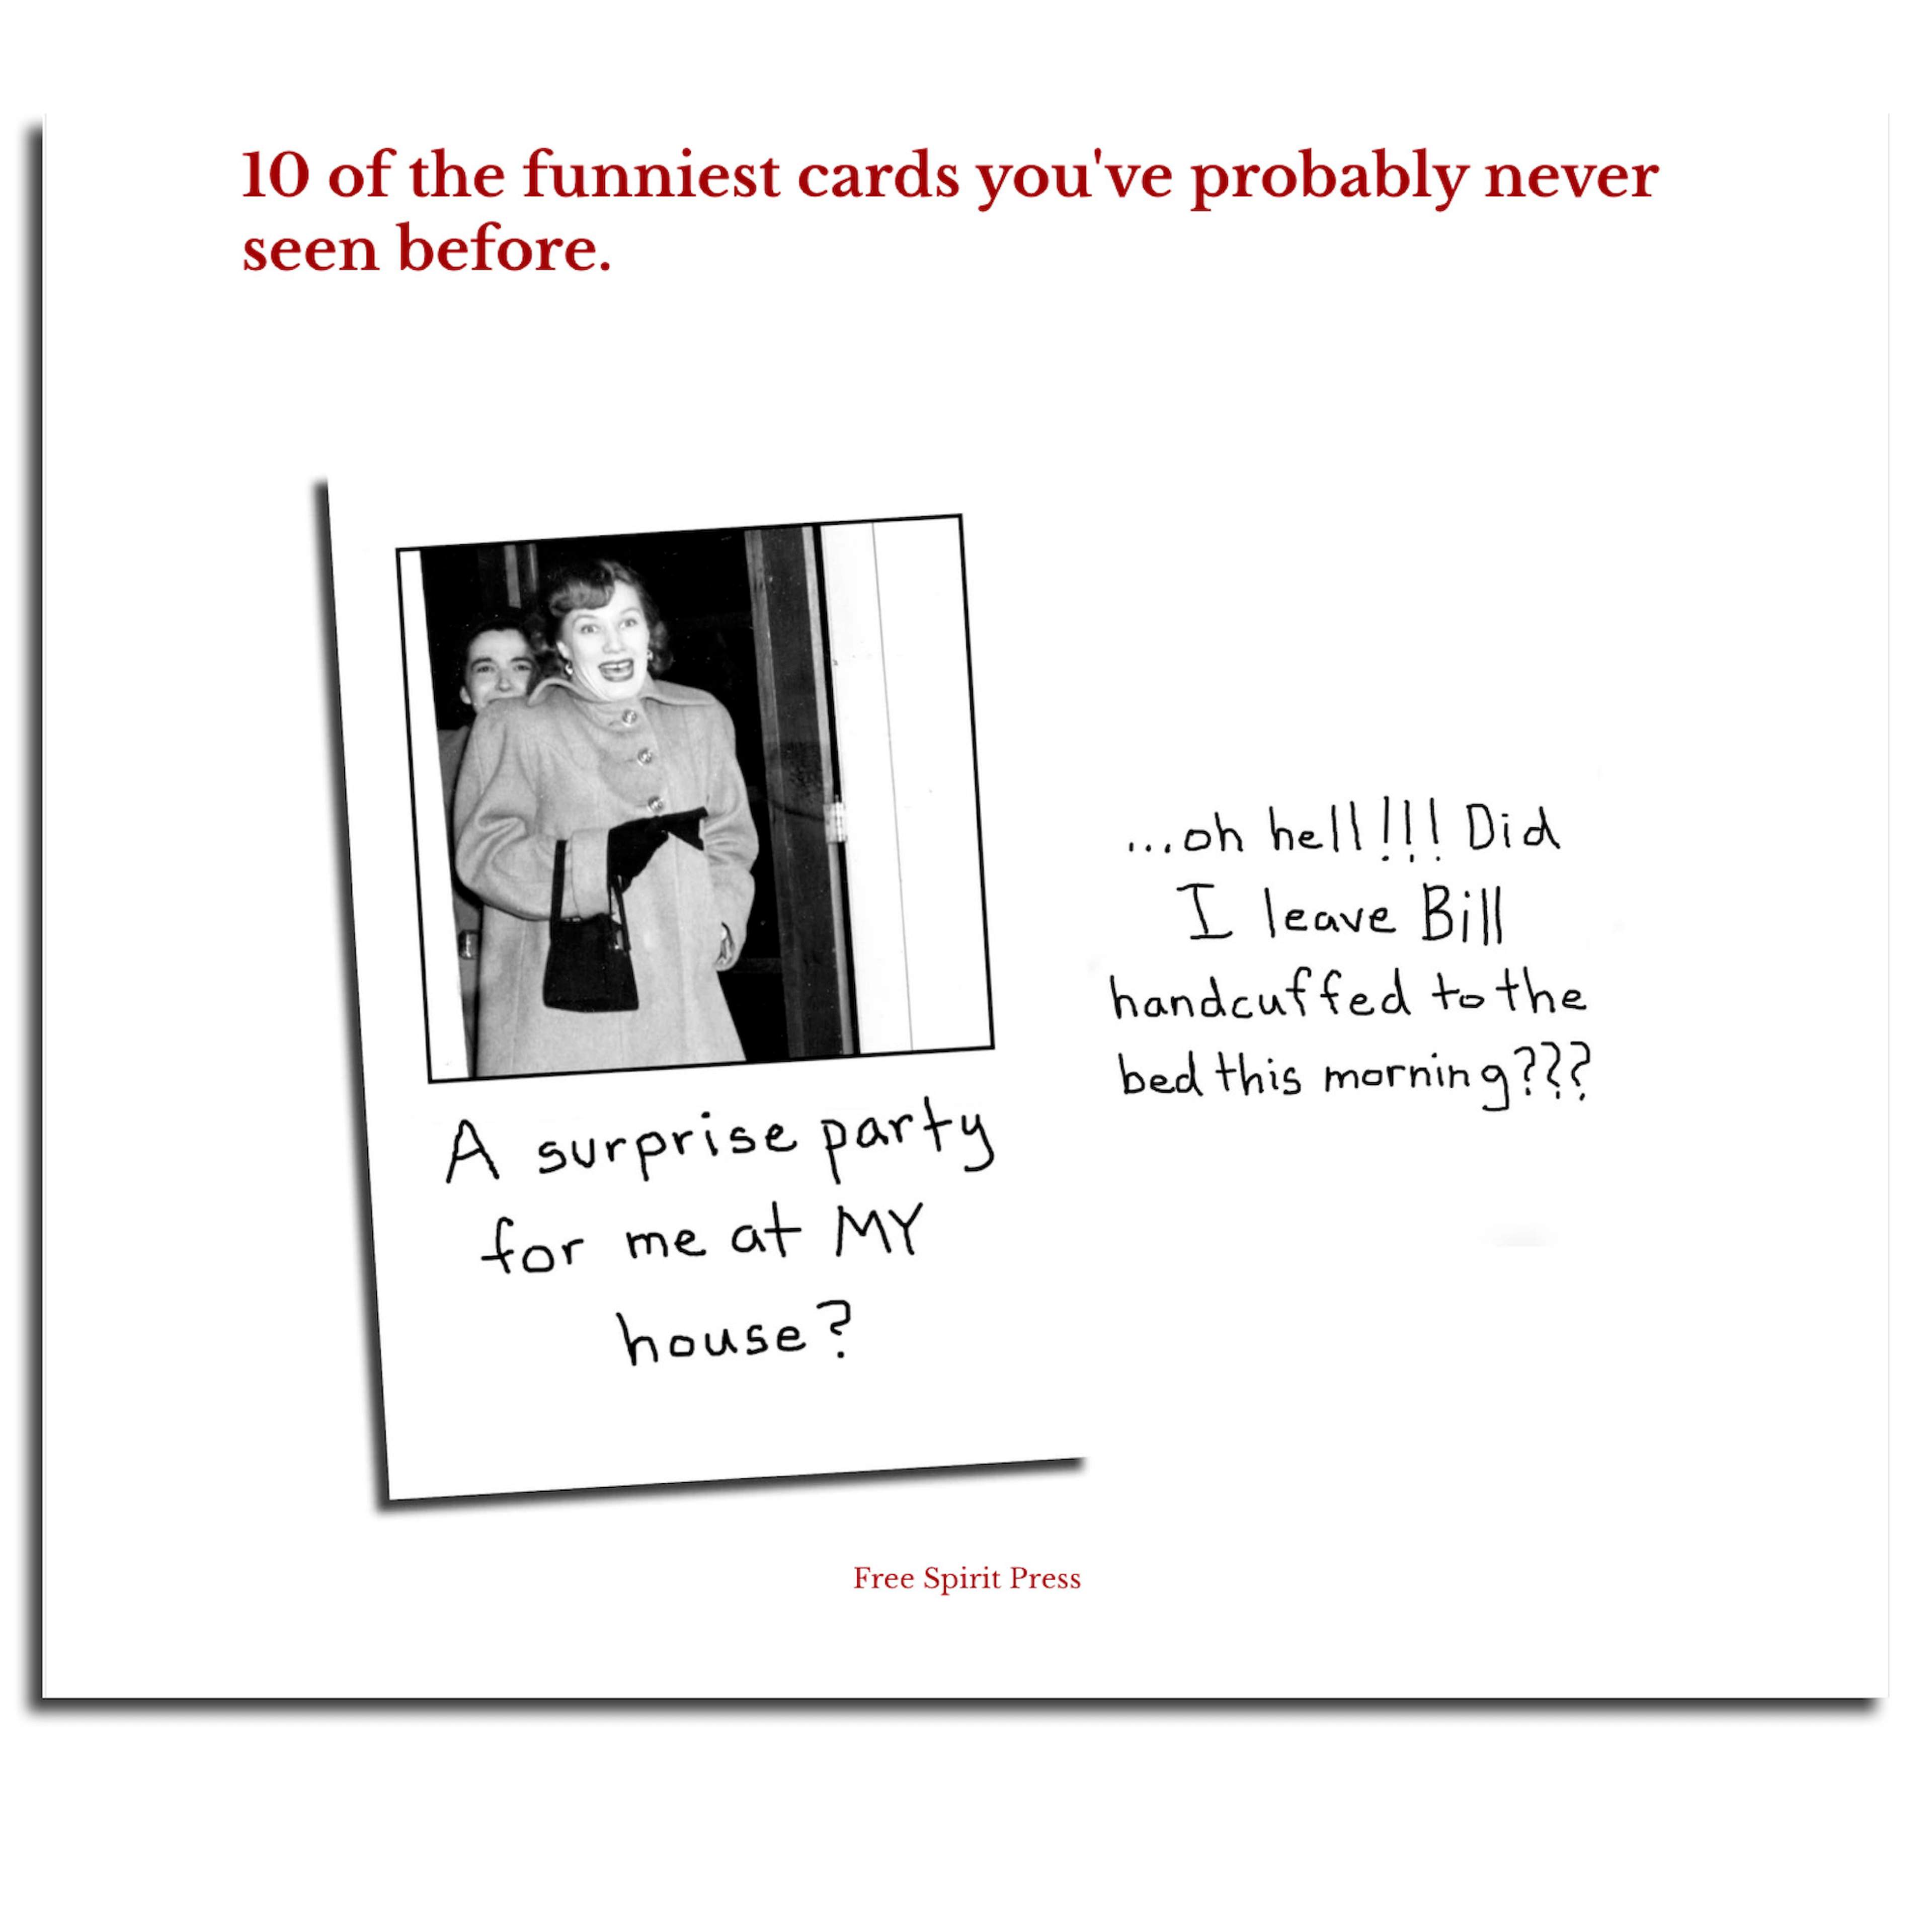 Rusty Pencil blog post about 10 of the funniest cards you've probably never seen before.